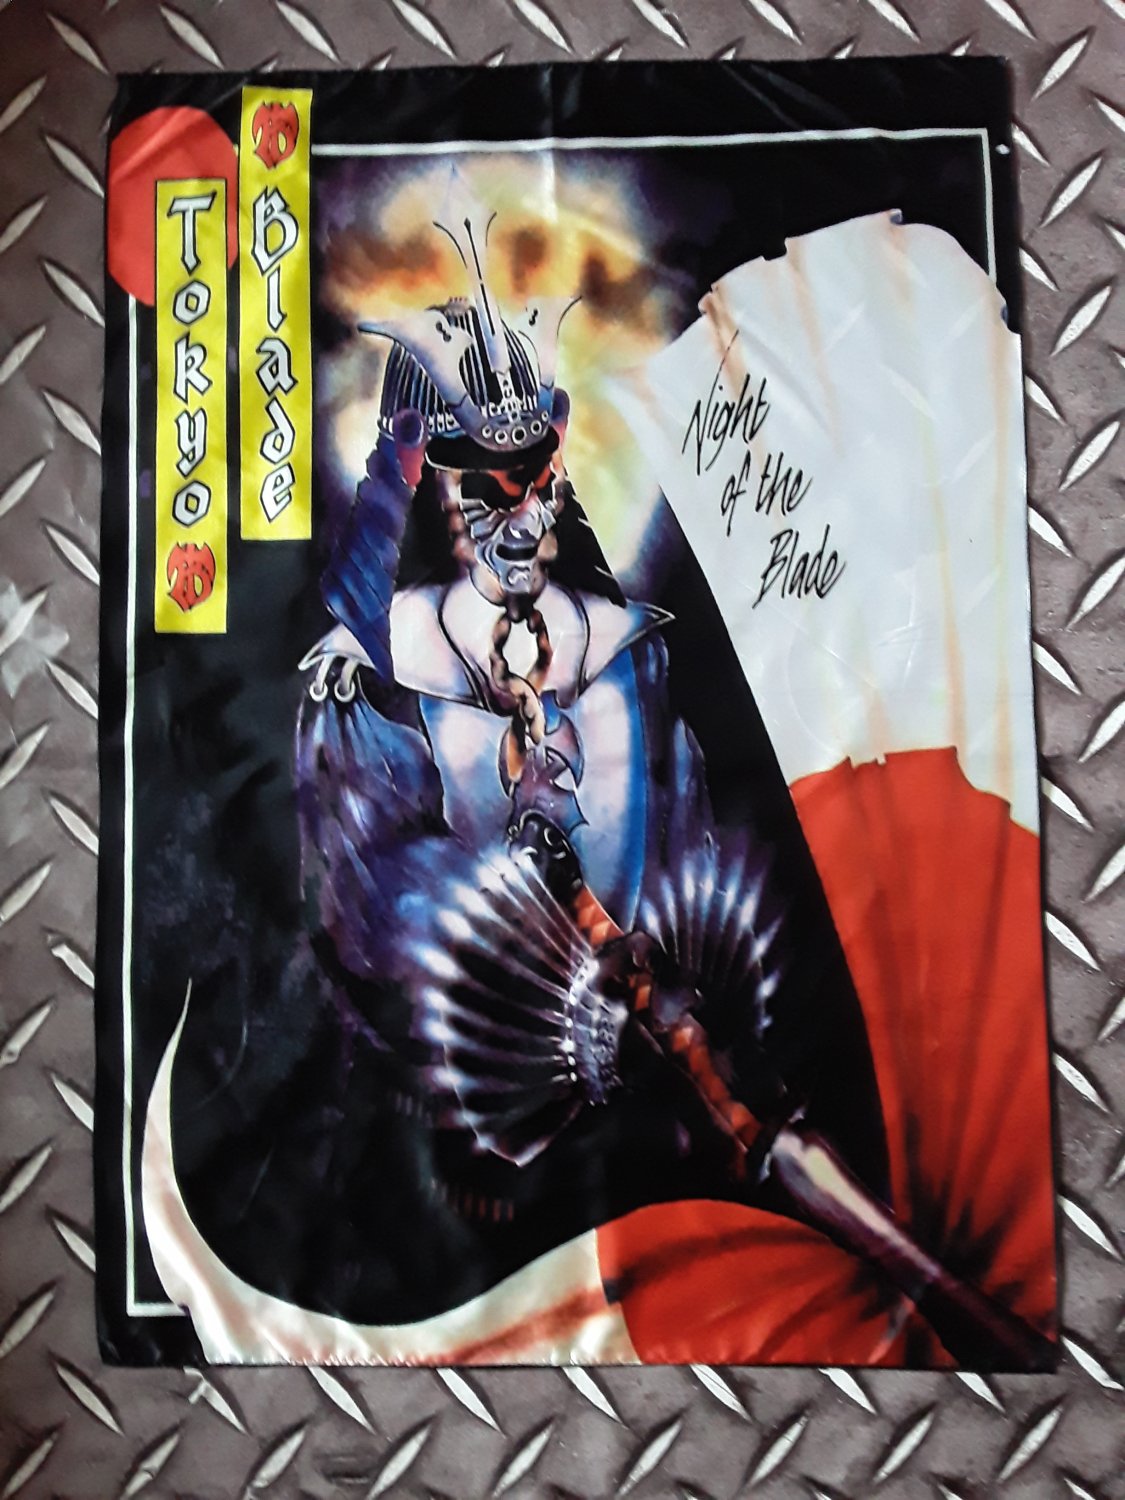 TOKYO BLADE - Night of the blade FLAG cloth POSTER Banner Heavy METAL NWOBHM